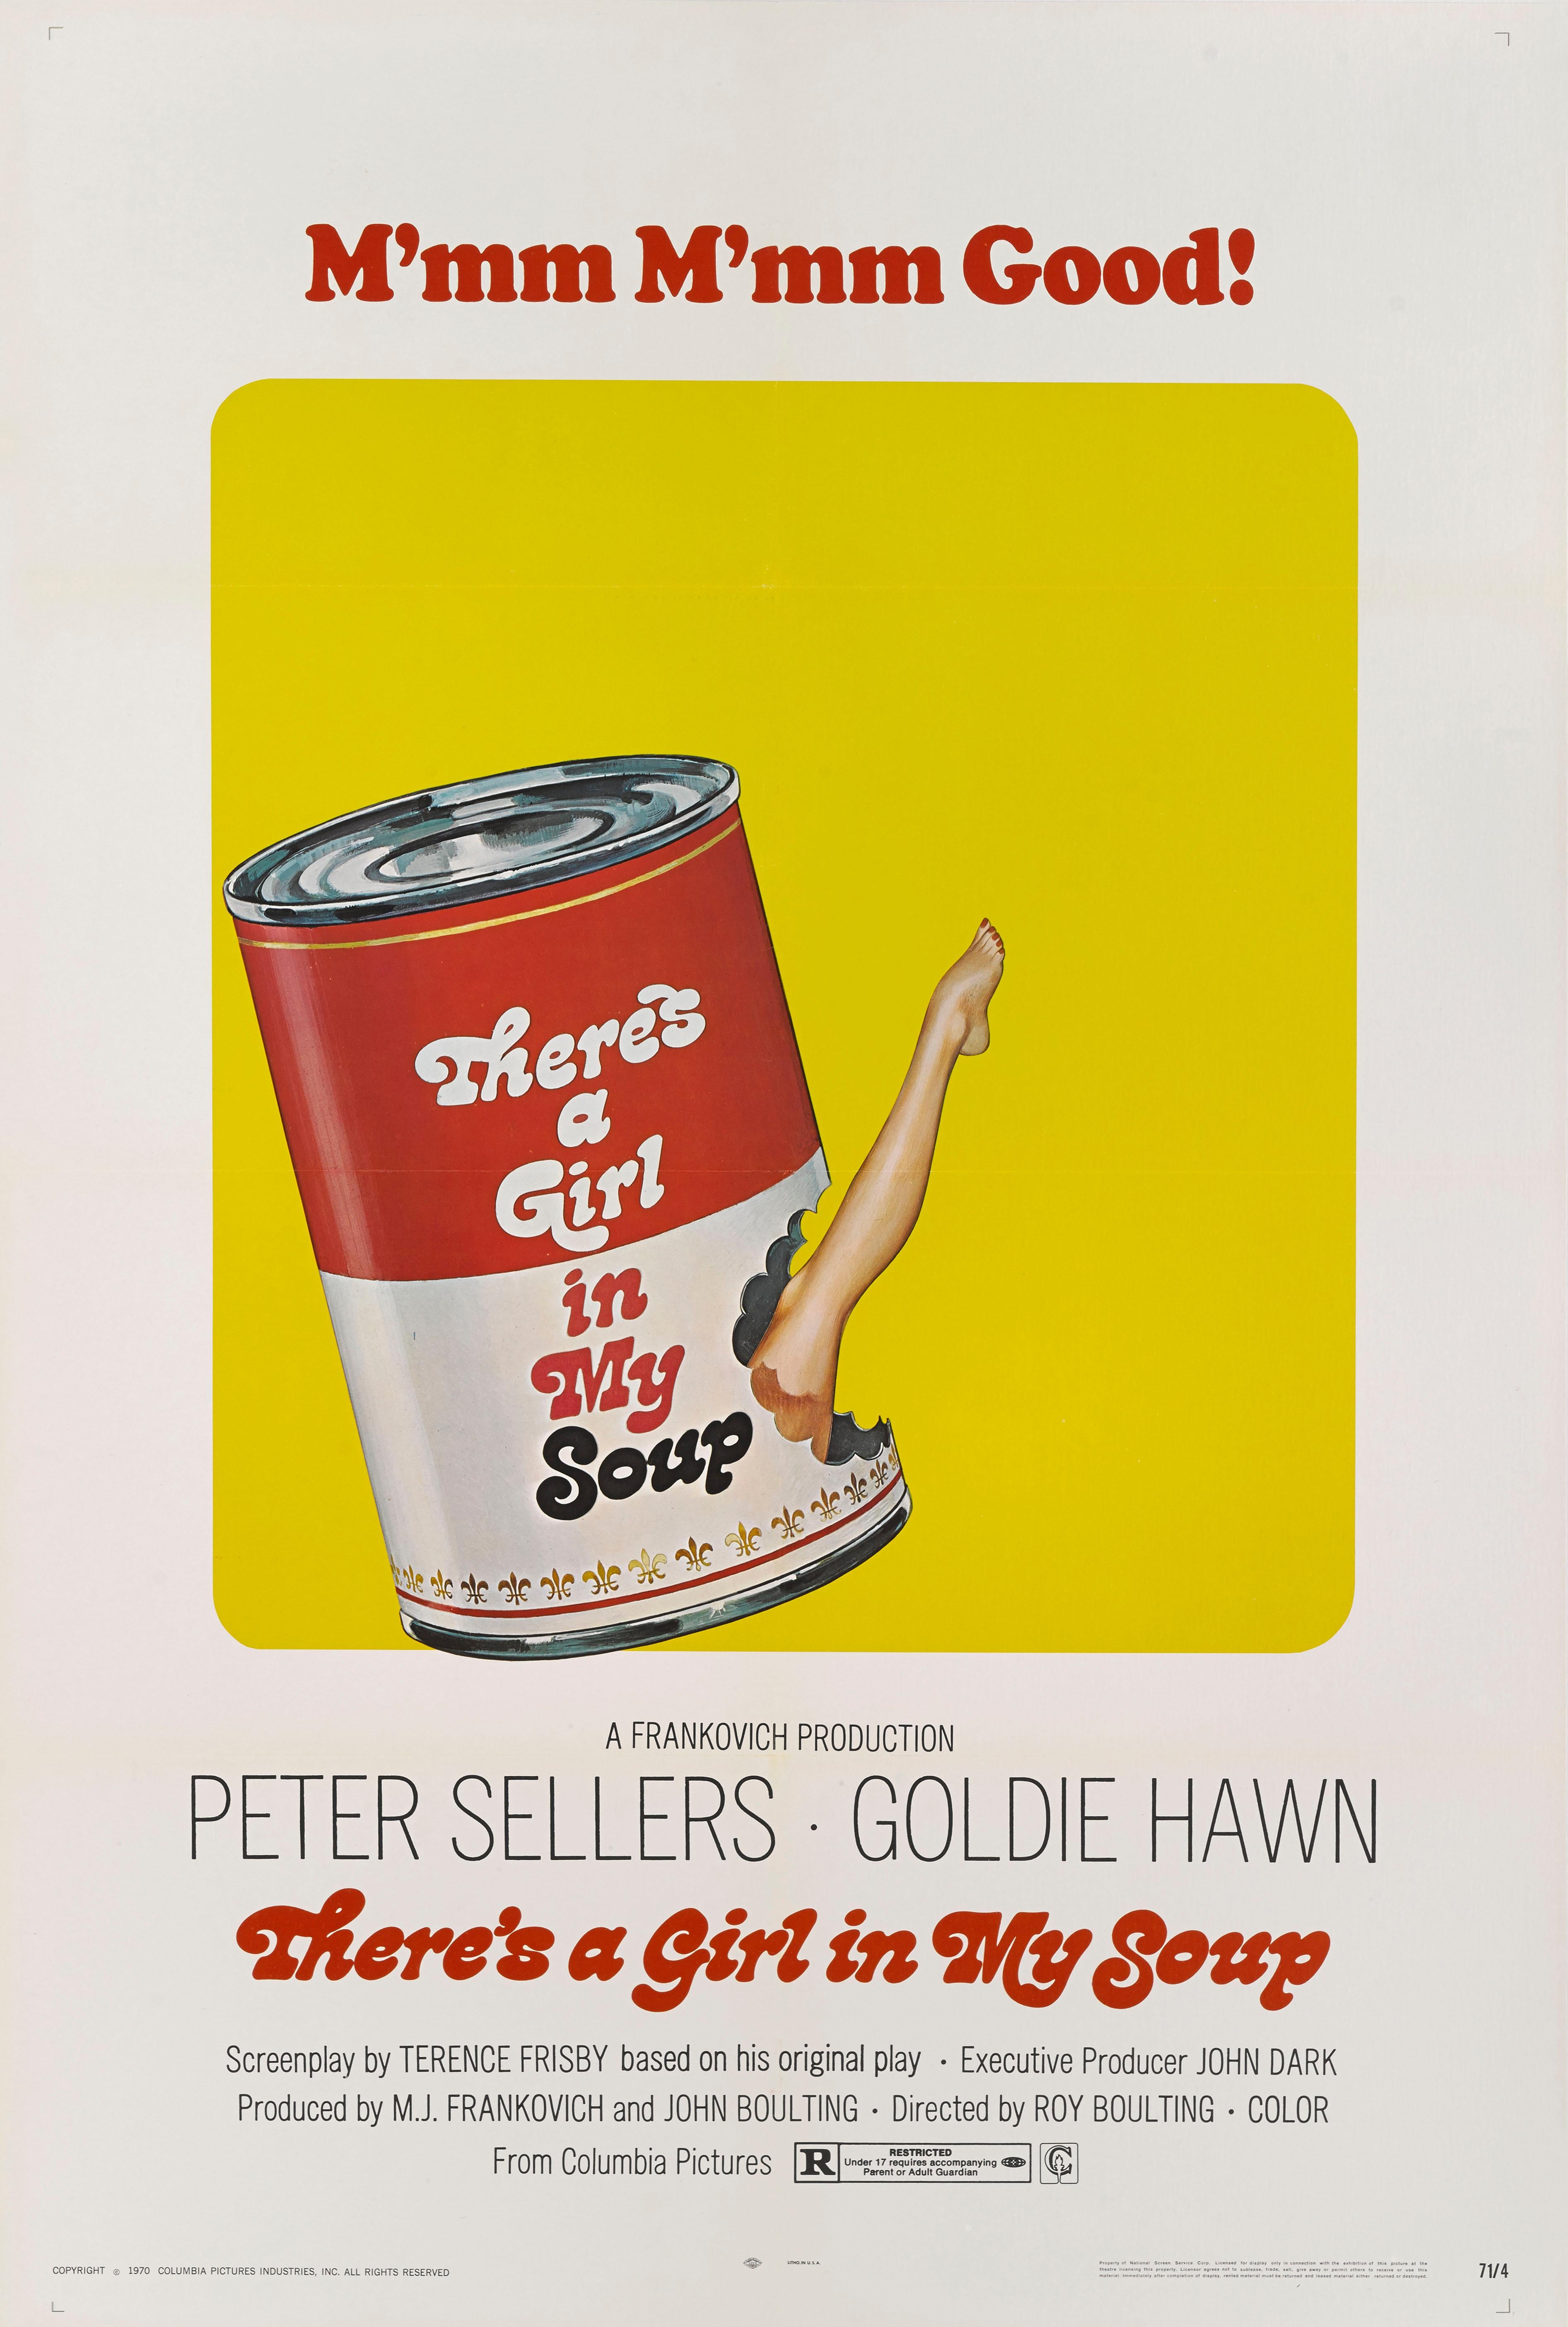 Original US movie poster for Roy Boulting's 1970 romantic comedy starring Peter Sellers, Goldie Hawn.

  